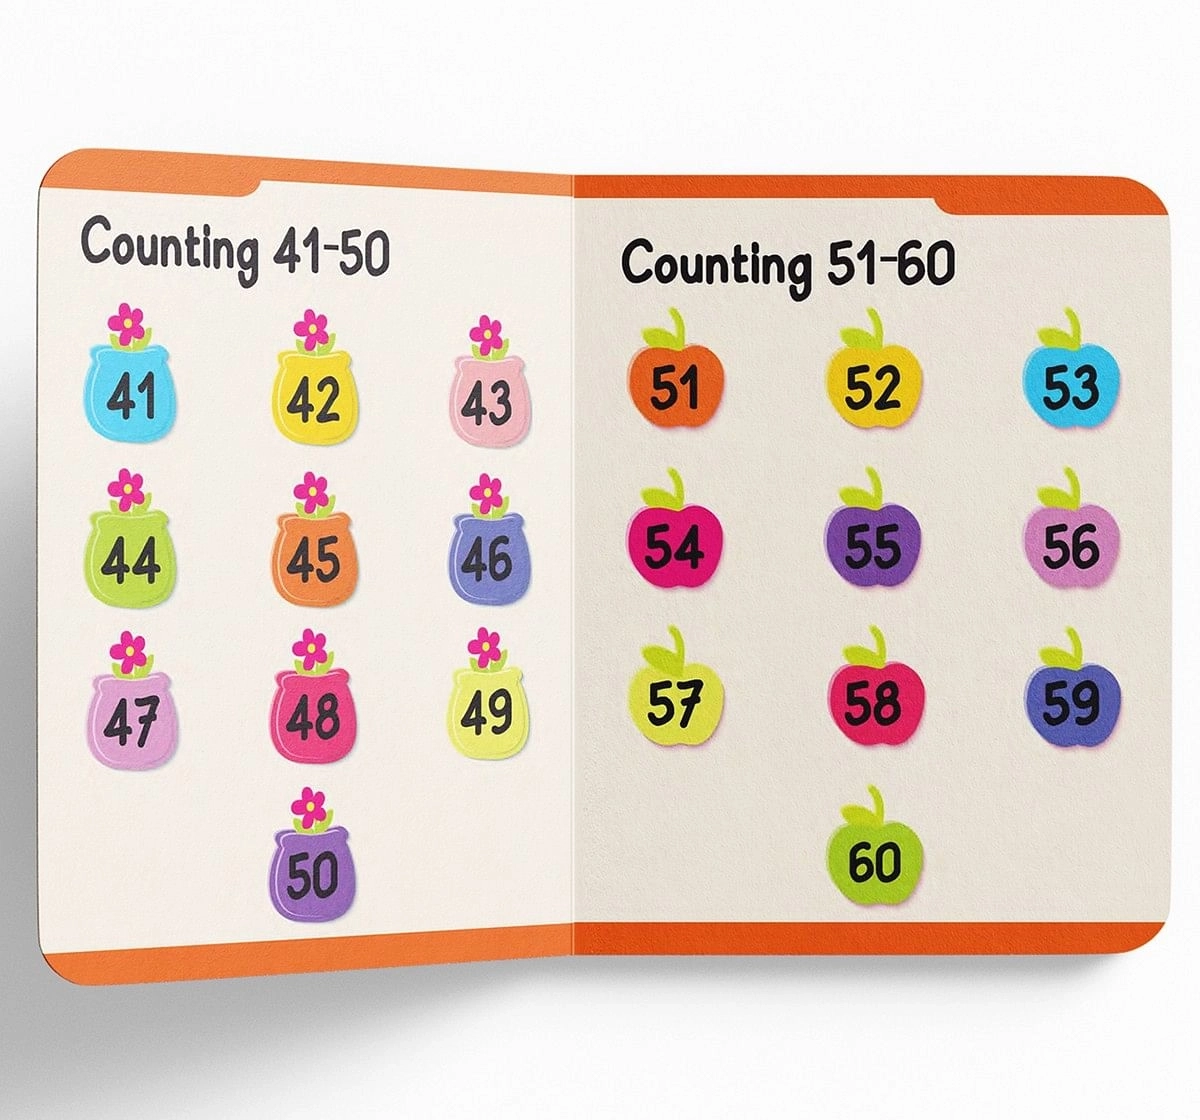 My First Padded Book Of Numbers, 26 Pages Book By Wonder House Books, Board Book